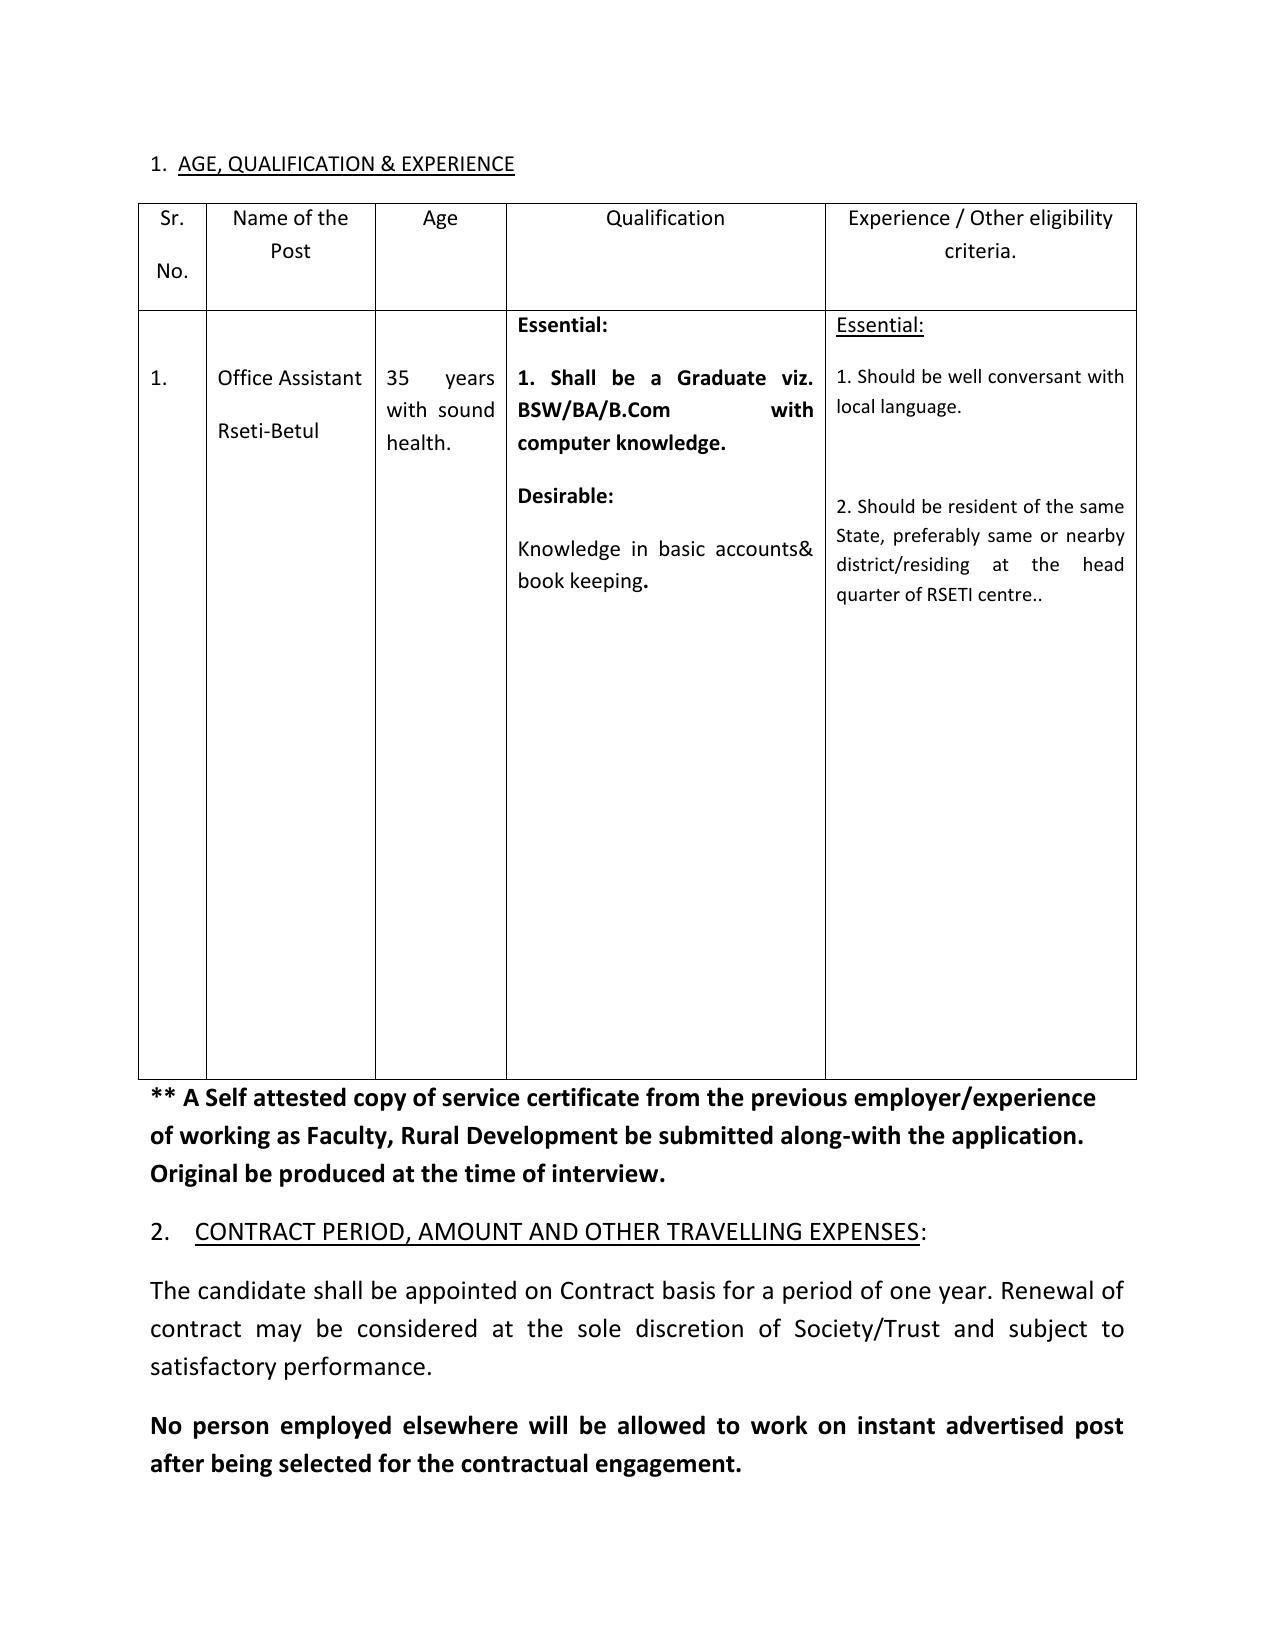 Central Bank of India Hoshangabad Invites Application for Office Assistant Recruitment 2022 - Page 2